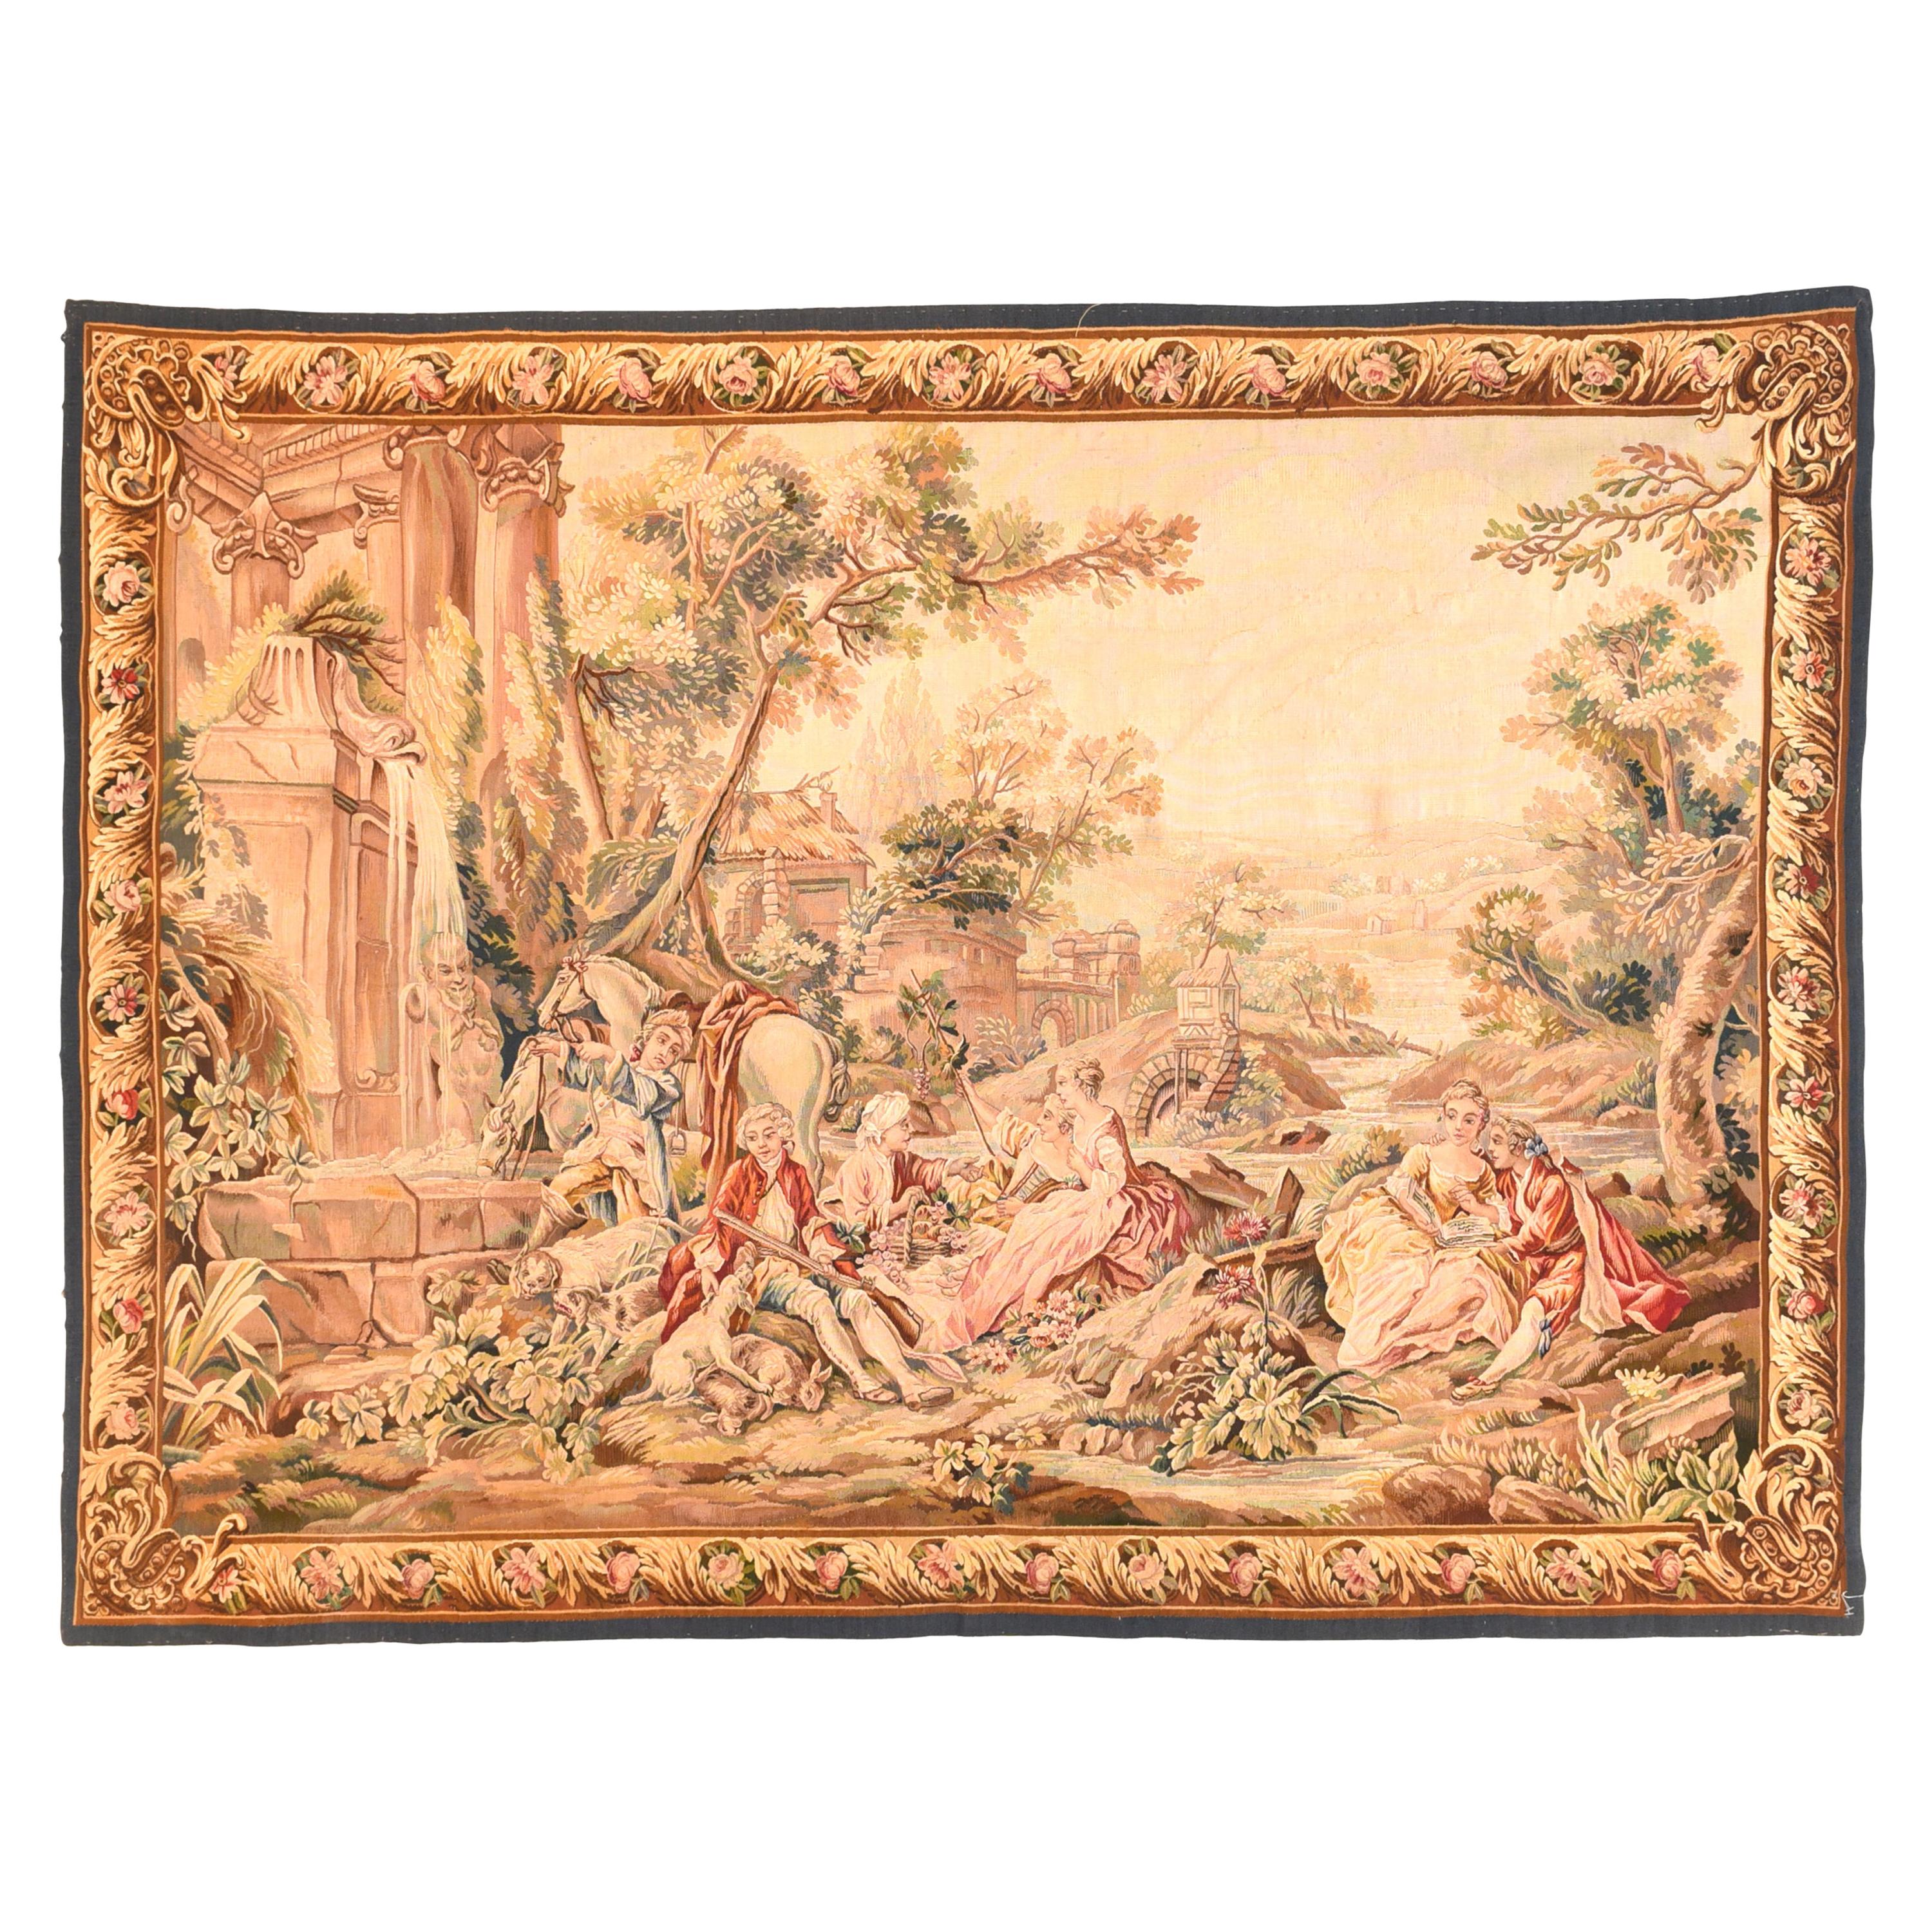 Extremely Fine Antique Aubusson-Beauvais Pictorial French Tapestry